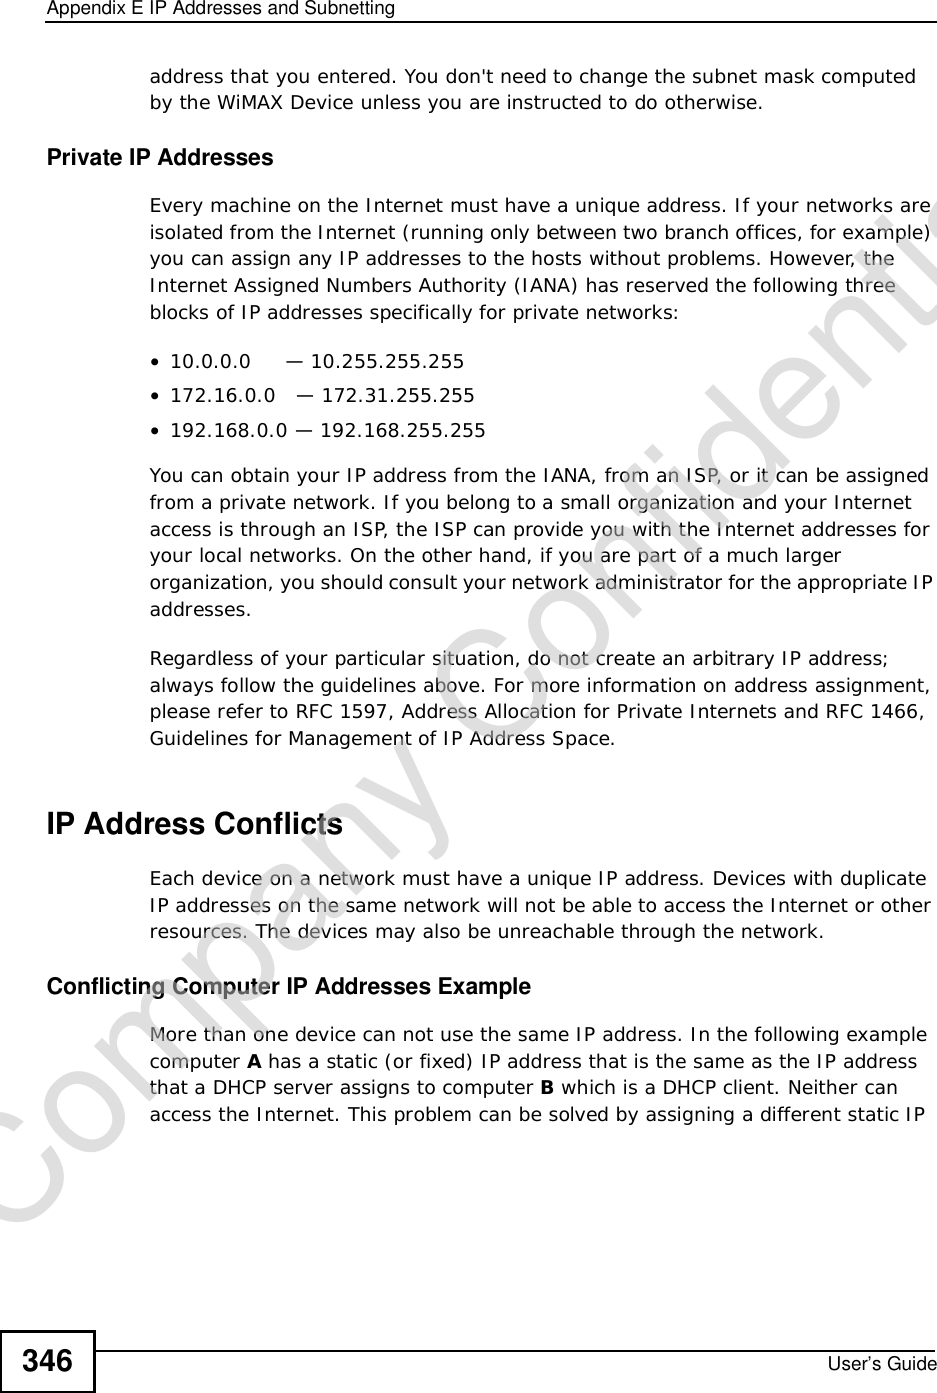 Appendix EIP Addresses and SubnettingUser’s Guide346address that you entered. You don&apos;t need to change the subnet mask computed by the WiMAX Device unless you are instructed to do otherwise.Private IP AddressesEvery machine on the Internet must have a unique address. If your networks are isolated from the Internet (running only between two branch offices, for example) you can assign any IP addresses to the hosts without problems. However, the Internet Assigned Numbers Authority (IANA) has reserved the following three blocks of IP addresses specifically for private networks:•10.0.0.0     — 10.255.255.255•172.16.0.0   — 172.31.255.255•192.168.0.0 — 192.168.255.255You can obtain your IP address from the IANA, from an ISP, or it can be assigned from a private network. If you belong to a small organization and your Internet access is through an ISP, the ISP can provide you with the Internet addresses for your local networks. On the other hand, if you are part of a much larger organization, you should consult your network administrator for the appropriate IP addresses.Regardless of your particular situation, do not create an arbitrary IP address; always follow the guidelines above. For more information on address assignment, please refer to RFC 1597, Address Allocation for Private Internets and RFC 1466, Guidelines for Management of IP Address Space.IP Address ConflictsEach device on a network must have a unique IP address. Devices with duplicate IP addresses on the same network will not be able to access the Internet or other resources. The devices may also be unreachable through the network. Conflicting Computer IP Addresses ExampleMore than one device can not use the same IP address. In the following example computer Ahas a static (or fixed) IP address that is the same as the IP address that a DHCP server assigns to computer B which is a DHCP client. Neither can access the Internet. This problem can be solved by assigning a different static IP Company Confidential